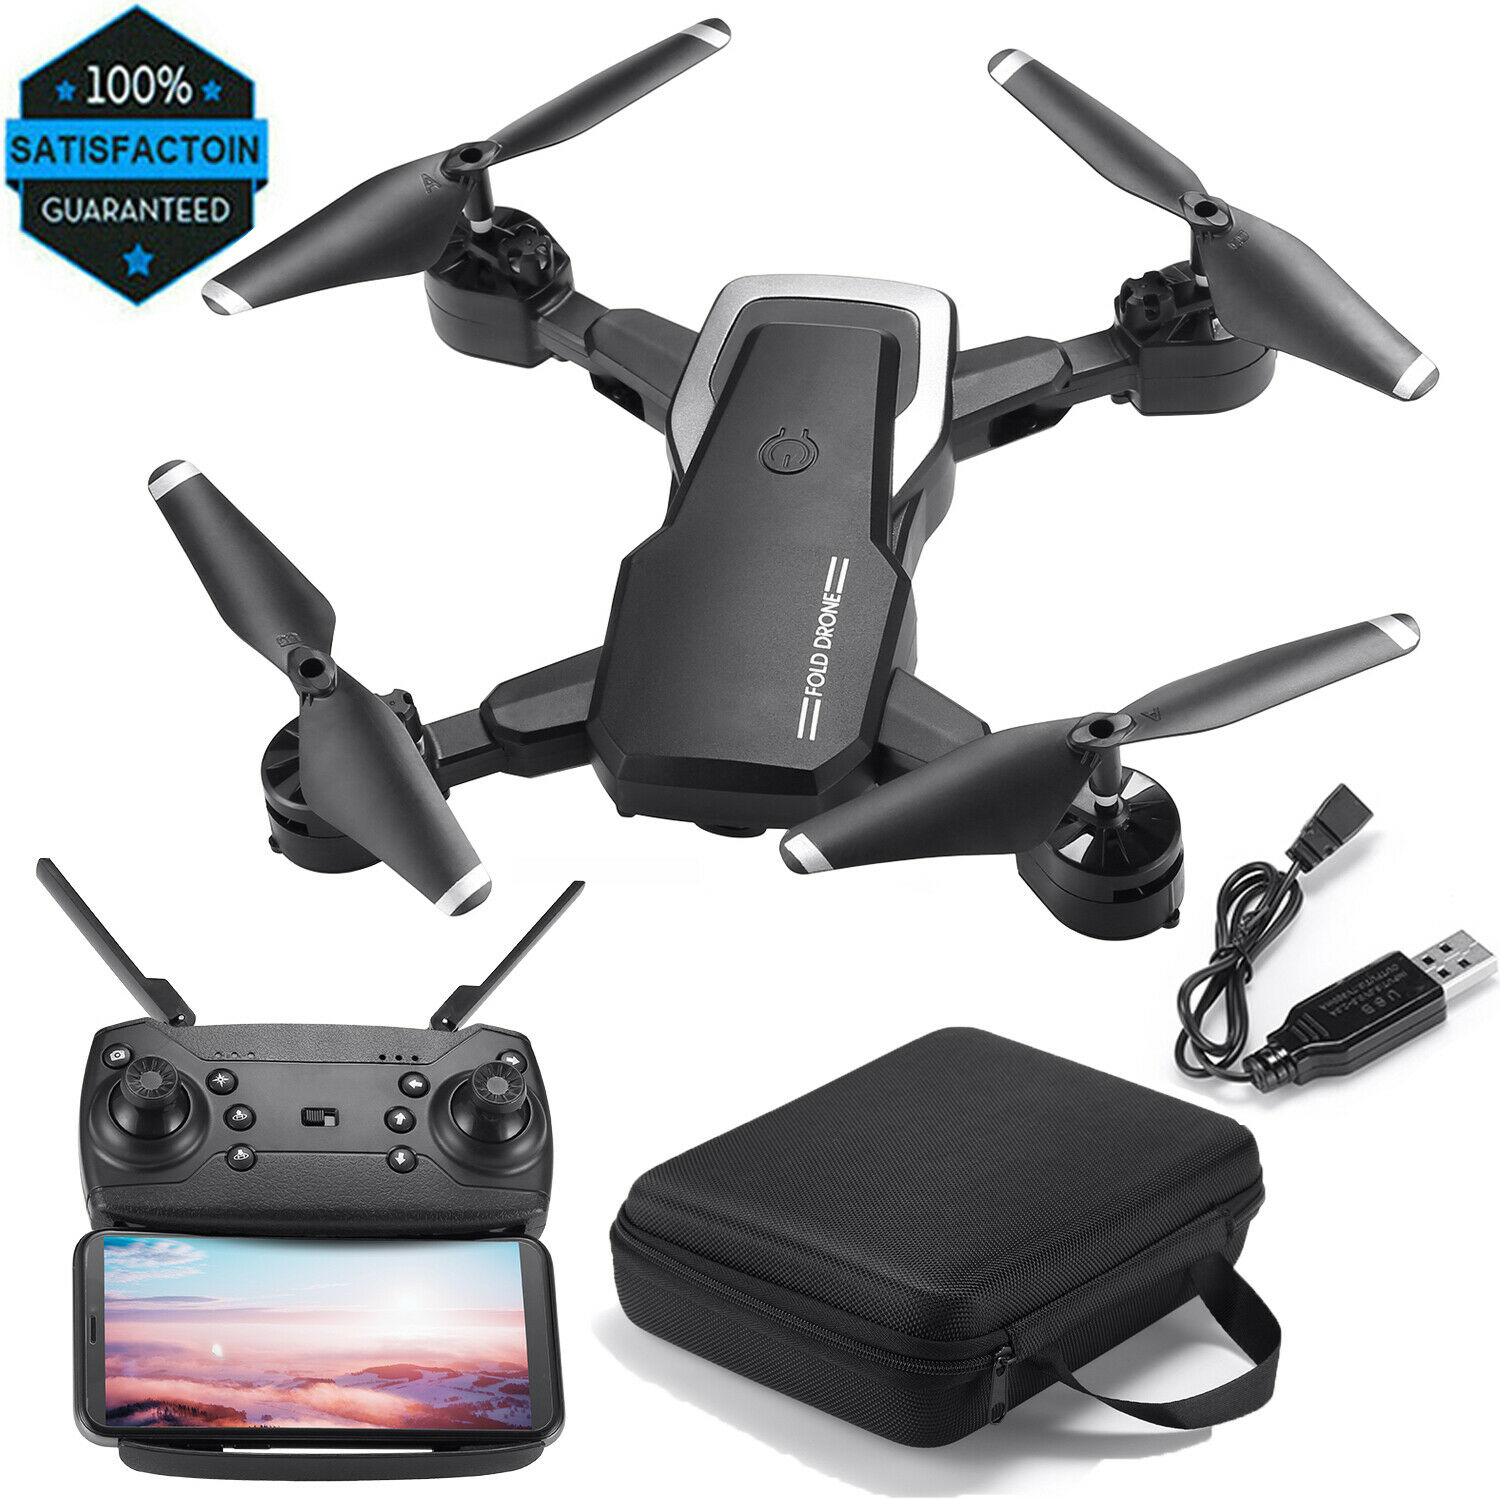 Mini Foldable Arm Rc Drone Selfie Wifi Fpv With Hd Camera Quadcopter Toy Us New